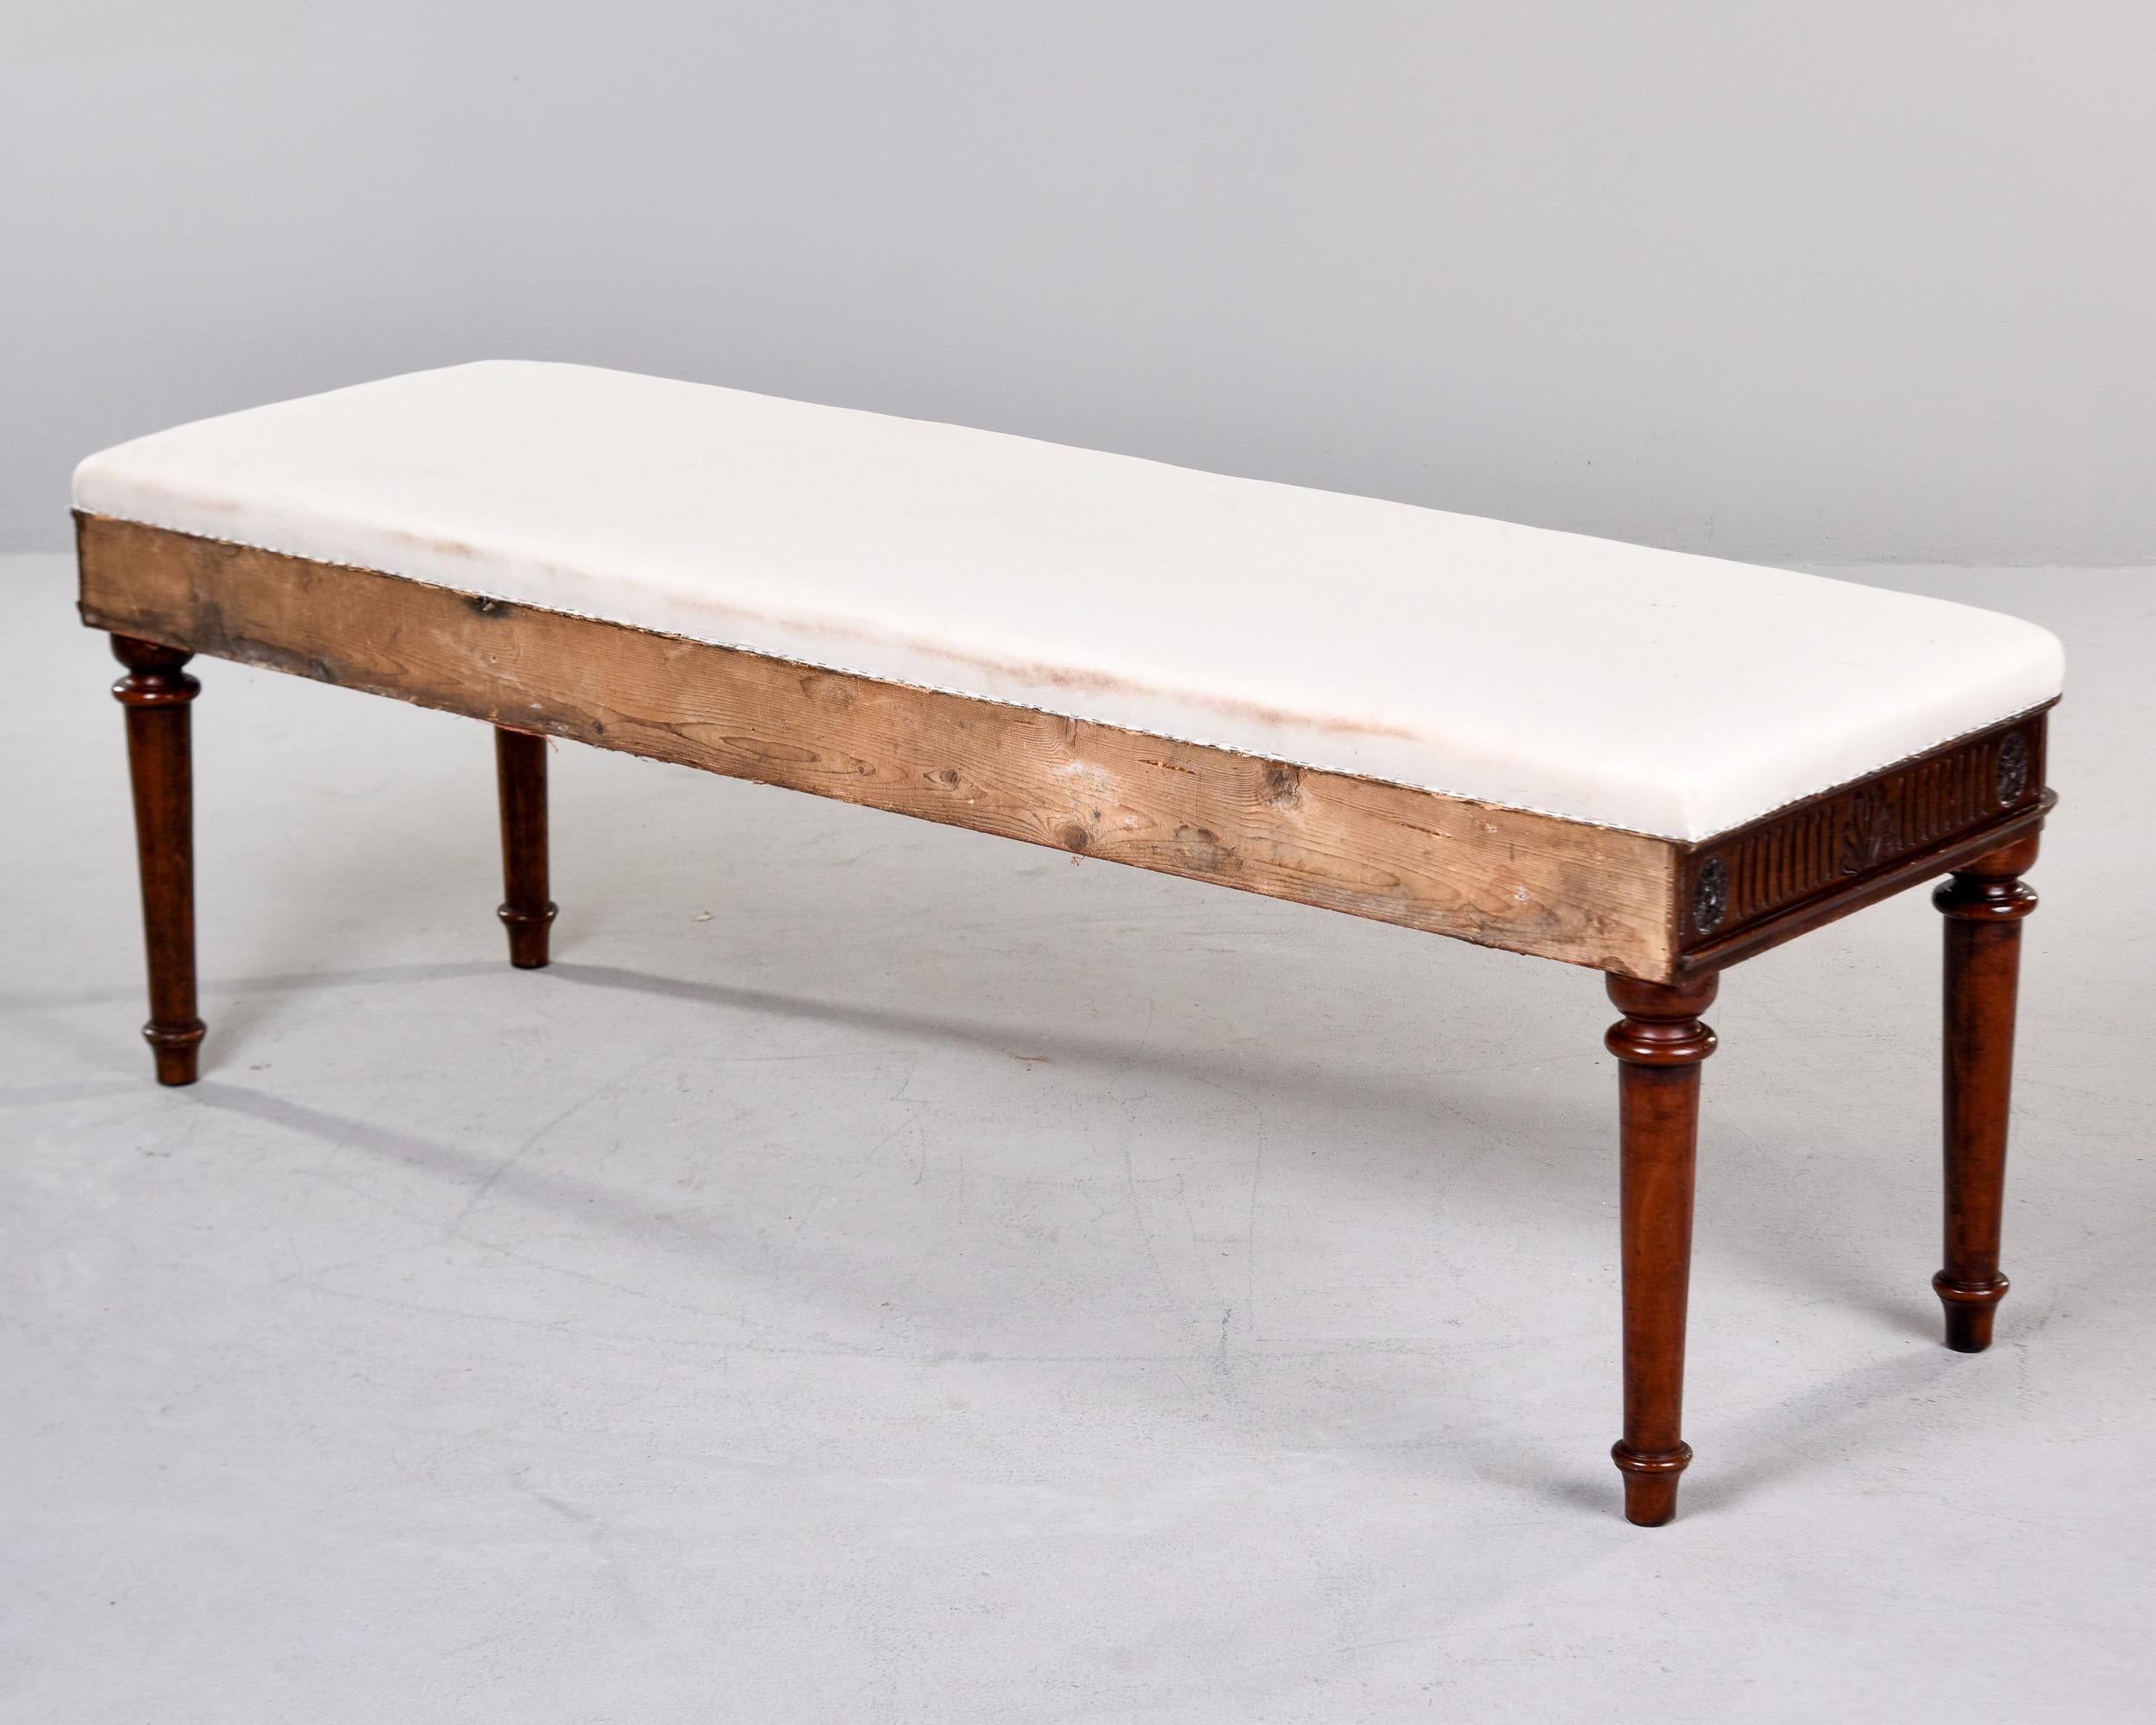 Mid 19th C English Upholstered Mahogany Window Seat with Reeded Detail   For Sale 3